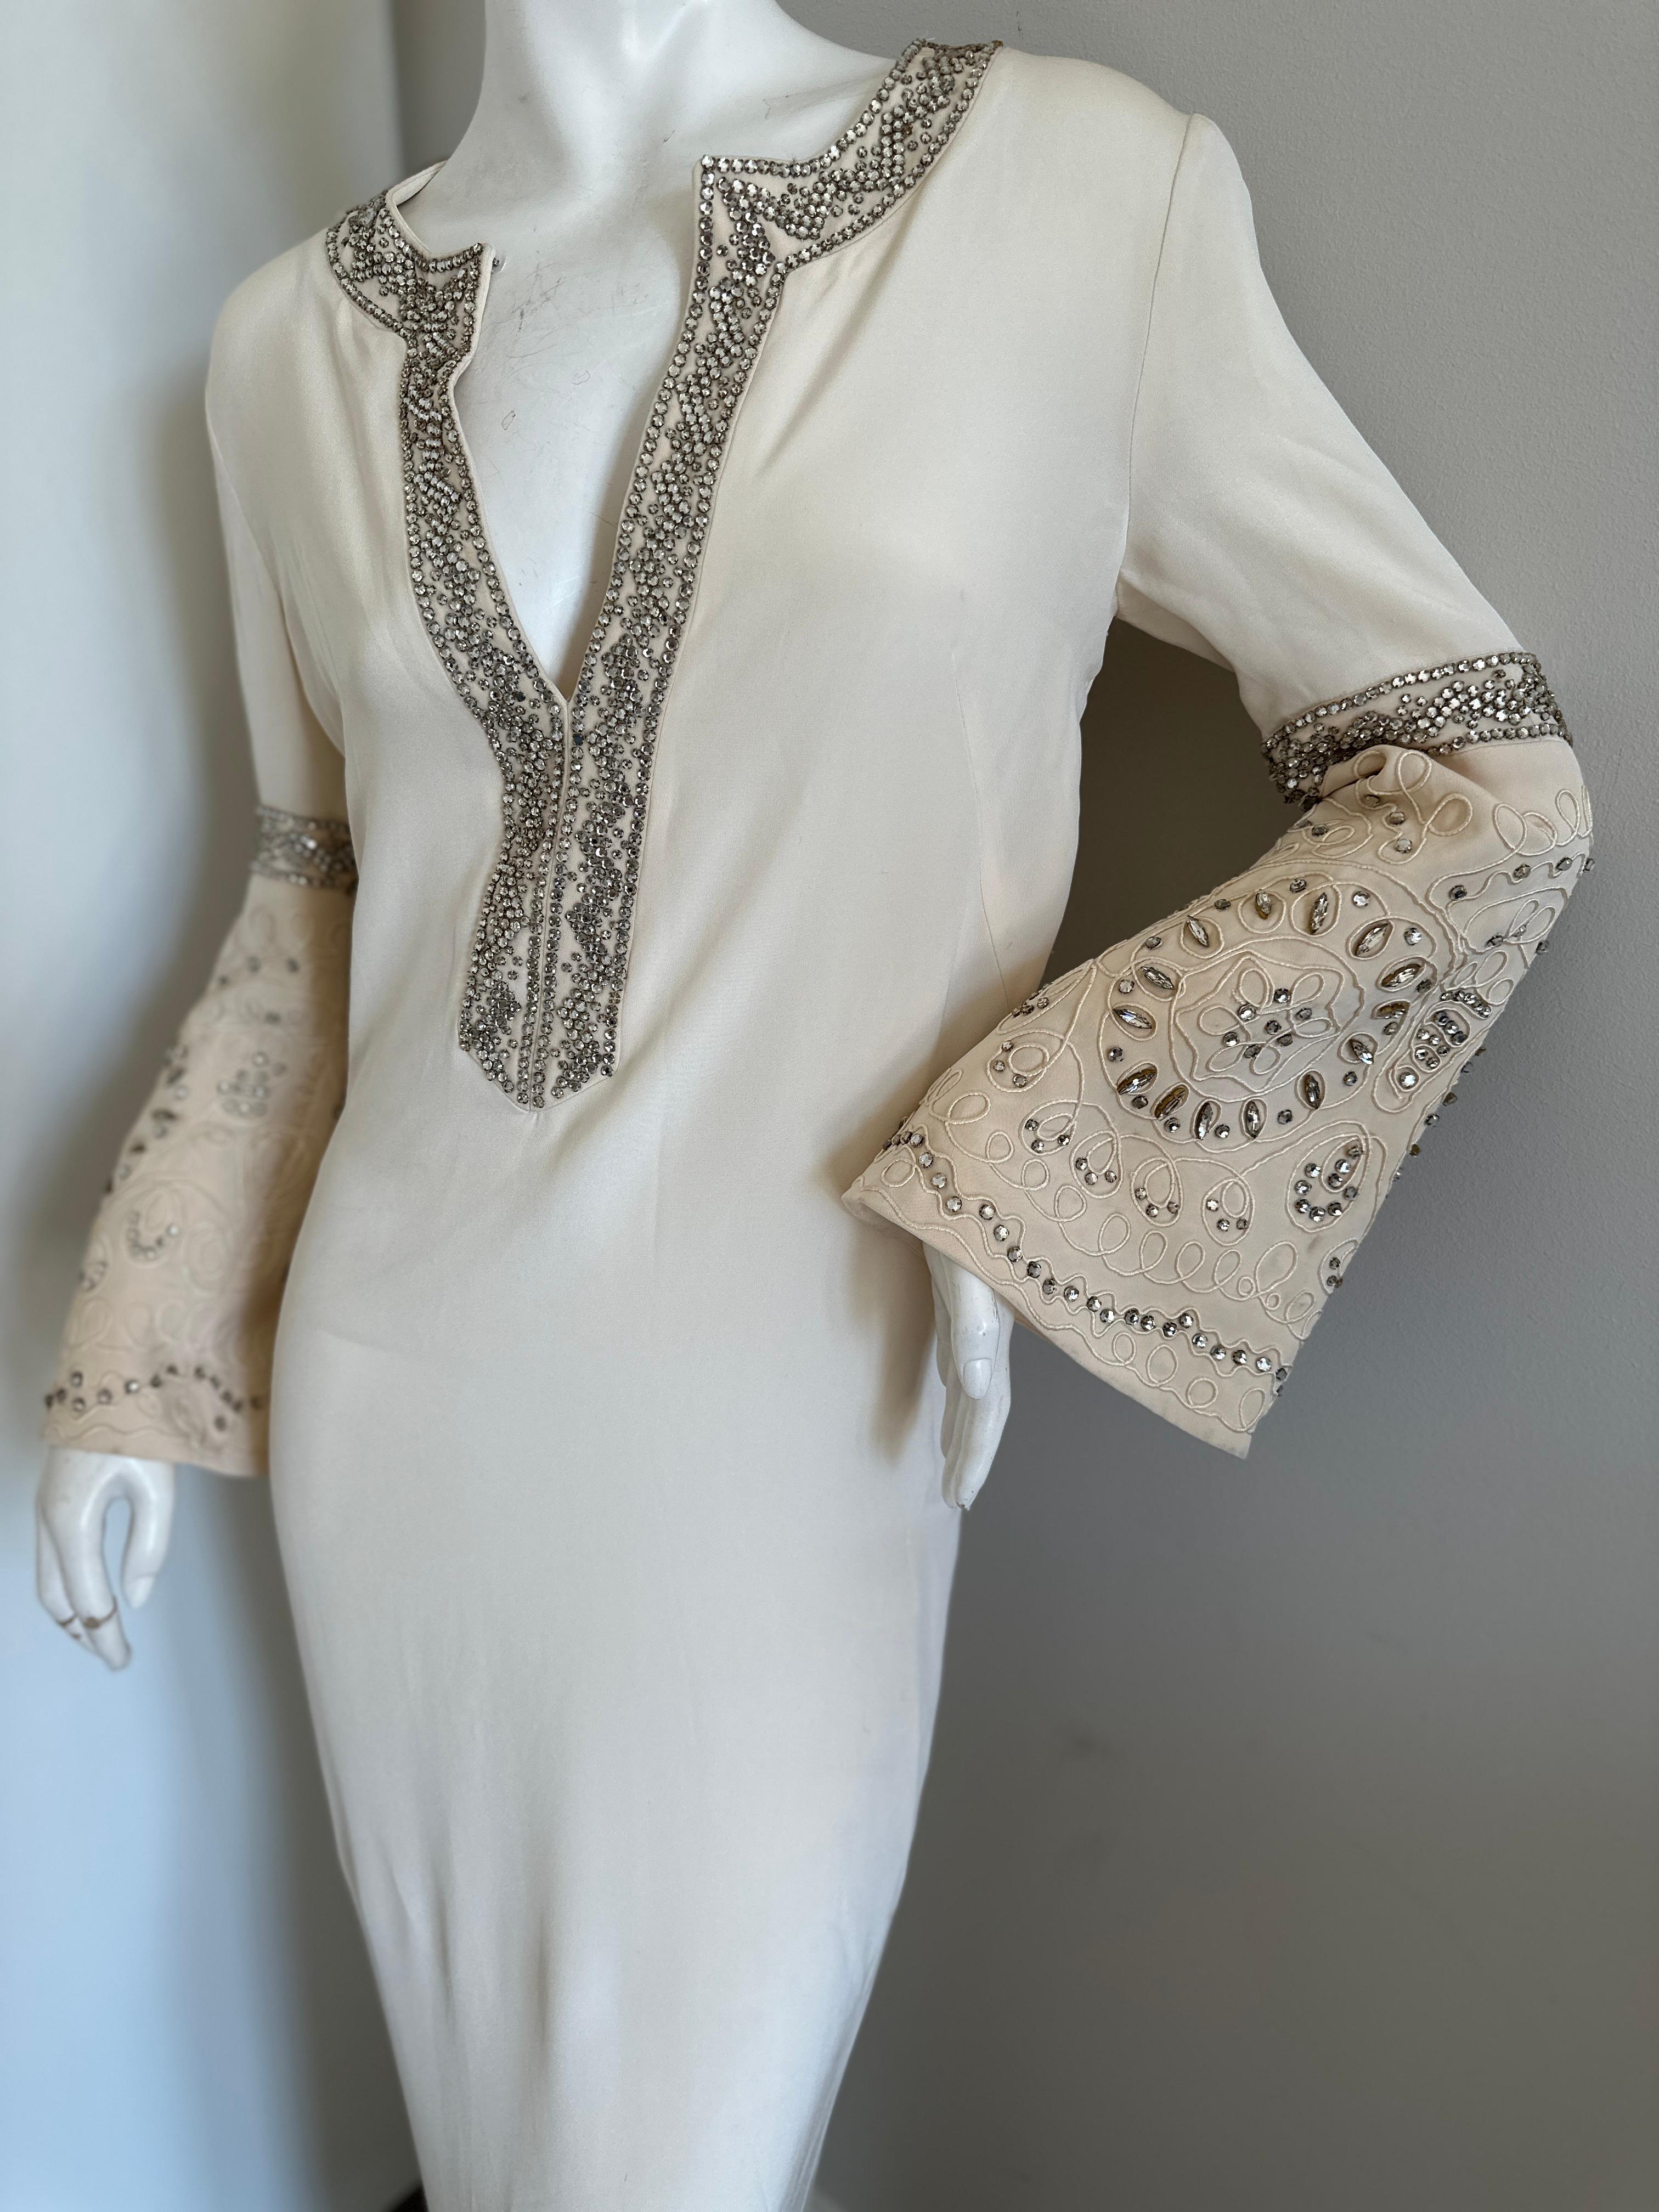 Emilio Pucci Vintage Ivory Silk Caftan Style Dress with Crystal & Beaded Details. The bell sleeves are a different fabric and a little more tan than ivory.
This is so cool, please use the zoom feature to see the details. 
Perfect for Ibiza or